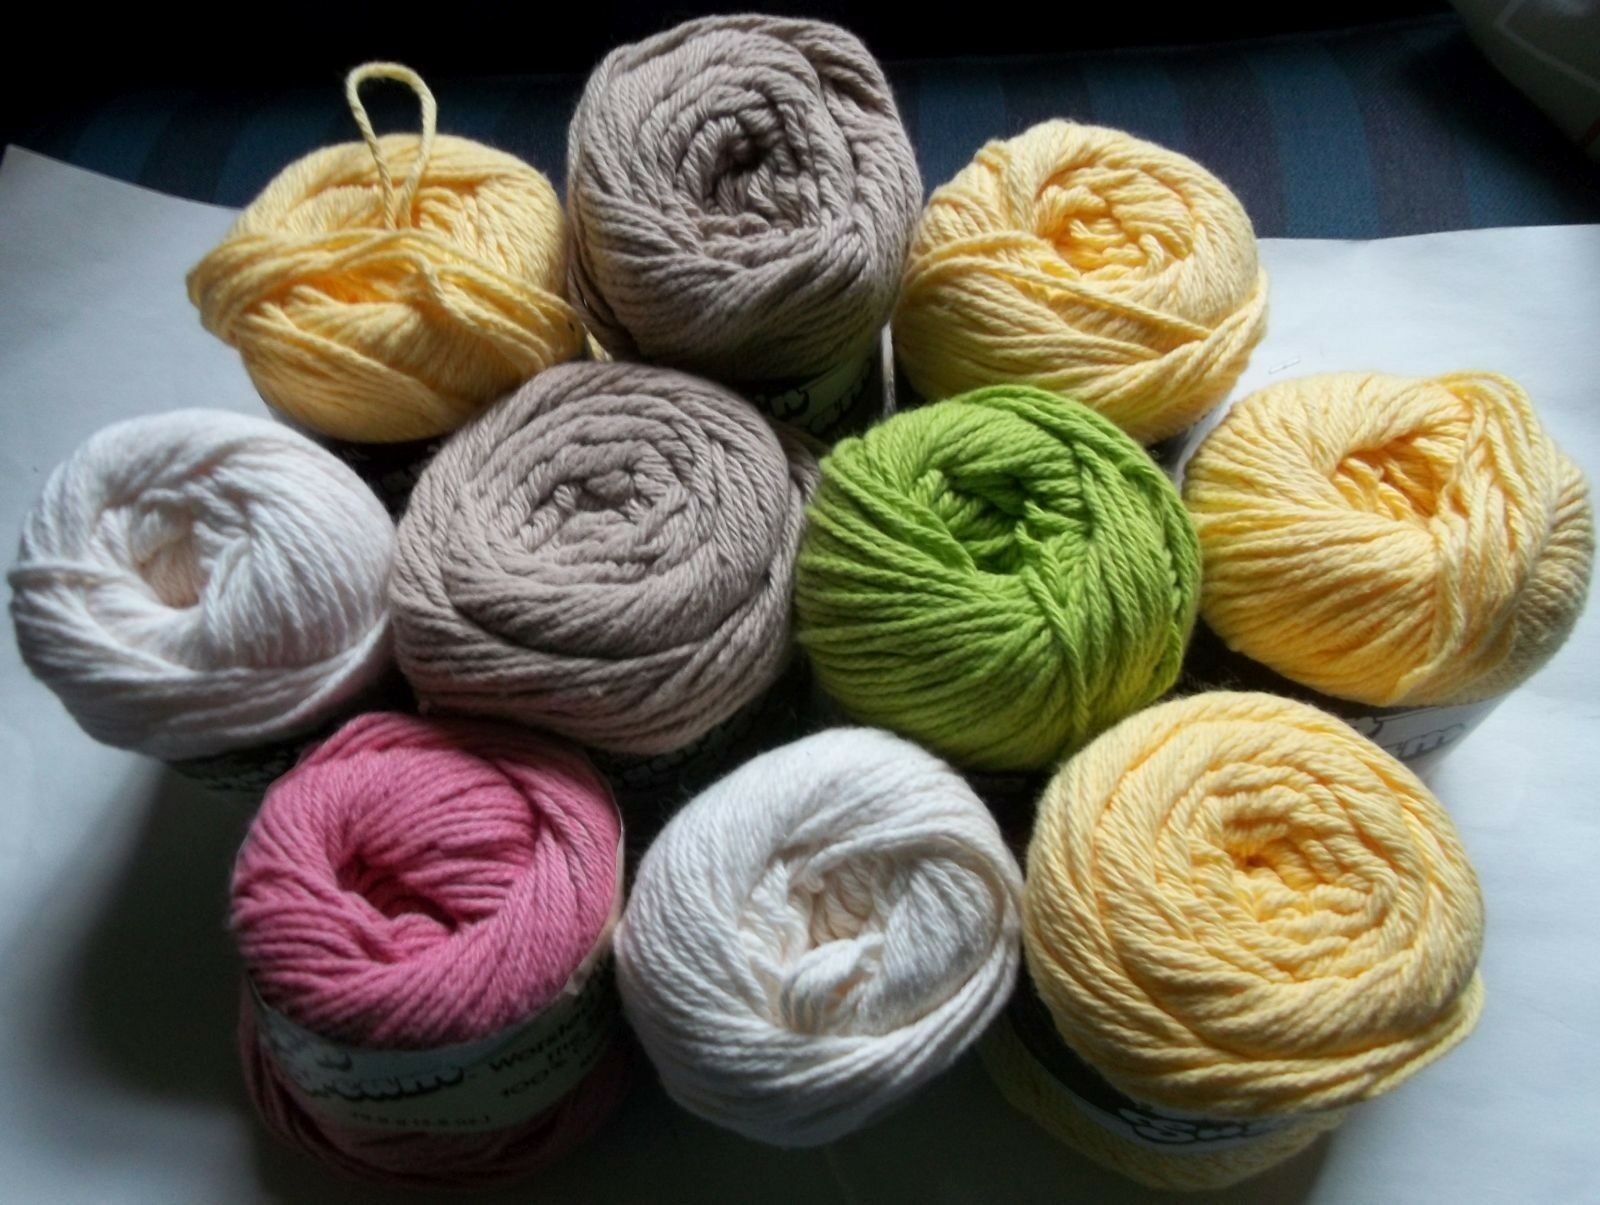 Primary image for Lily 100% Cotton Sugar n Cream Solid Colors 10 Skeins Balls 70.9 g 2.5 oz each